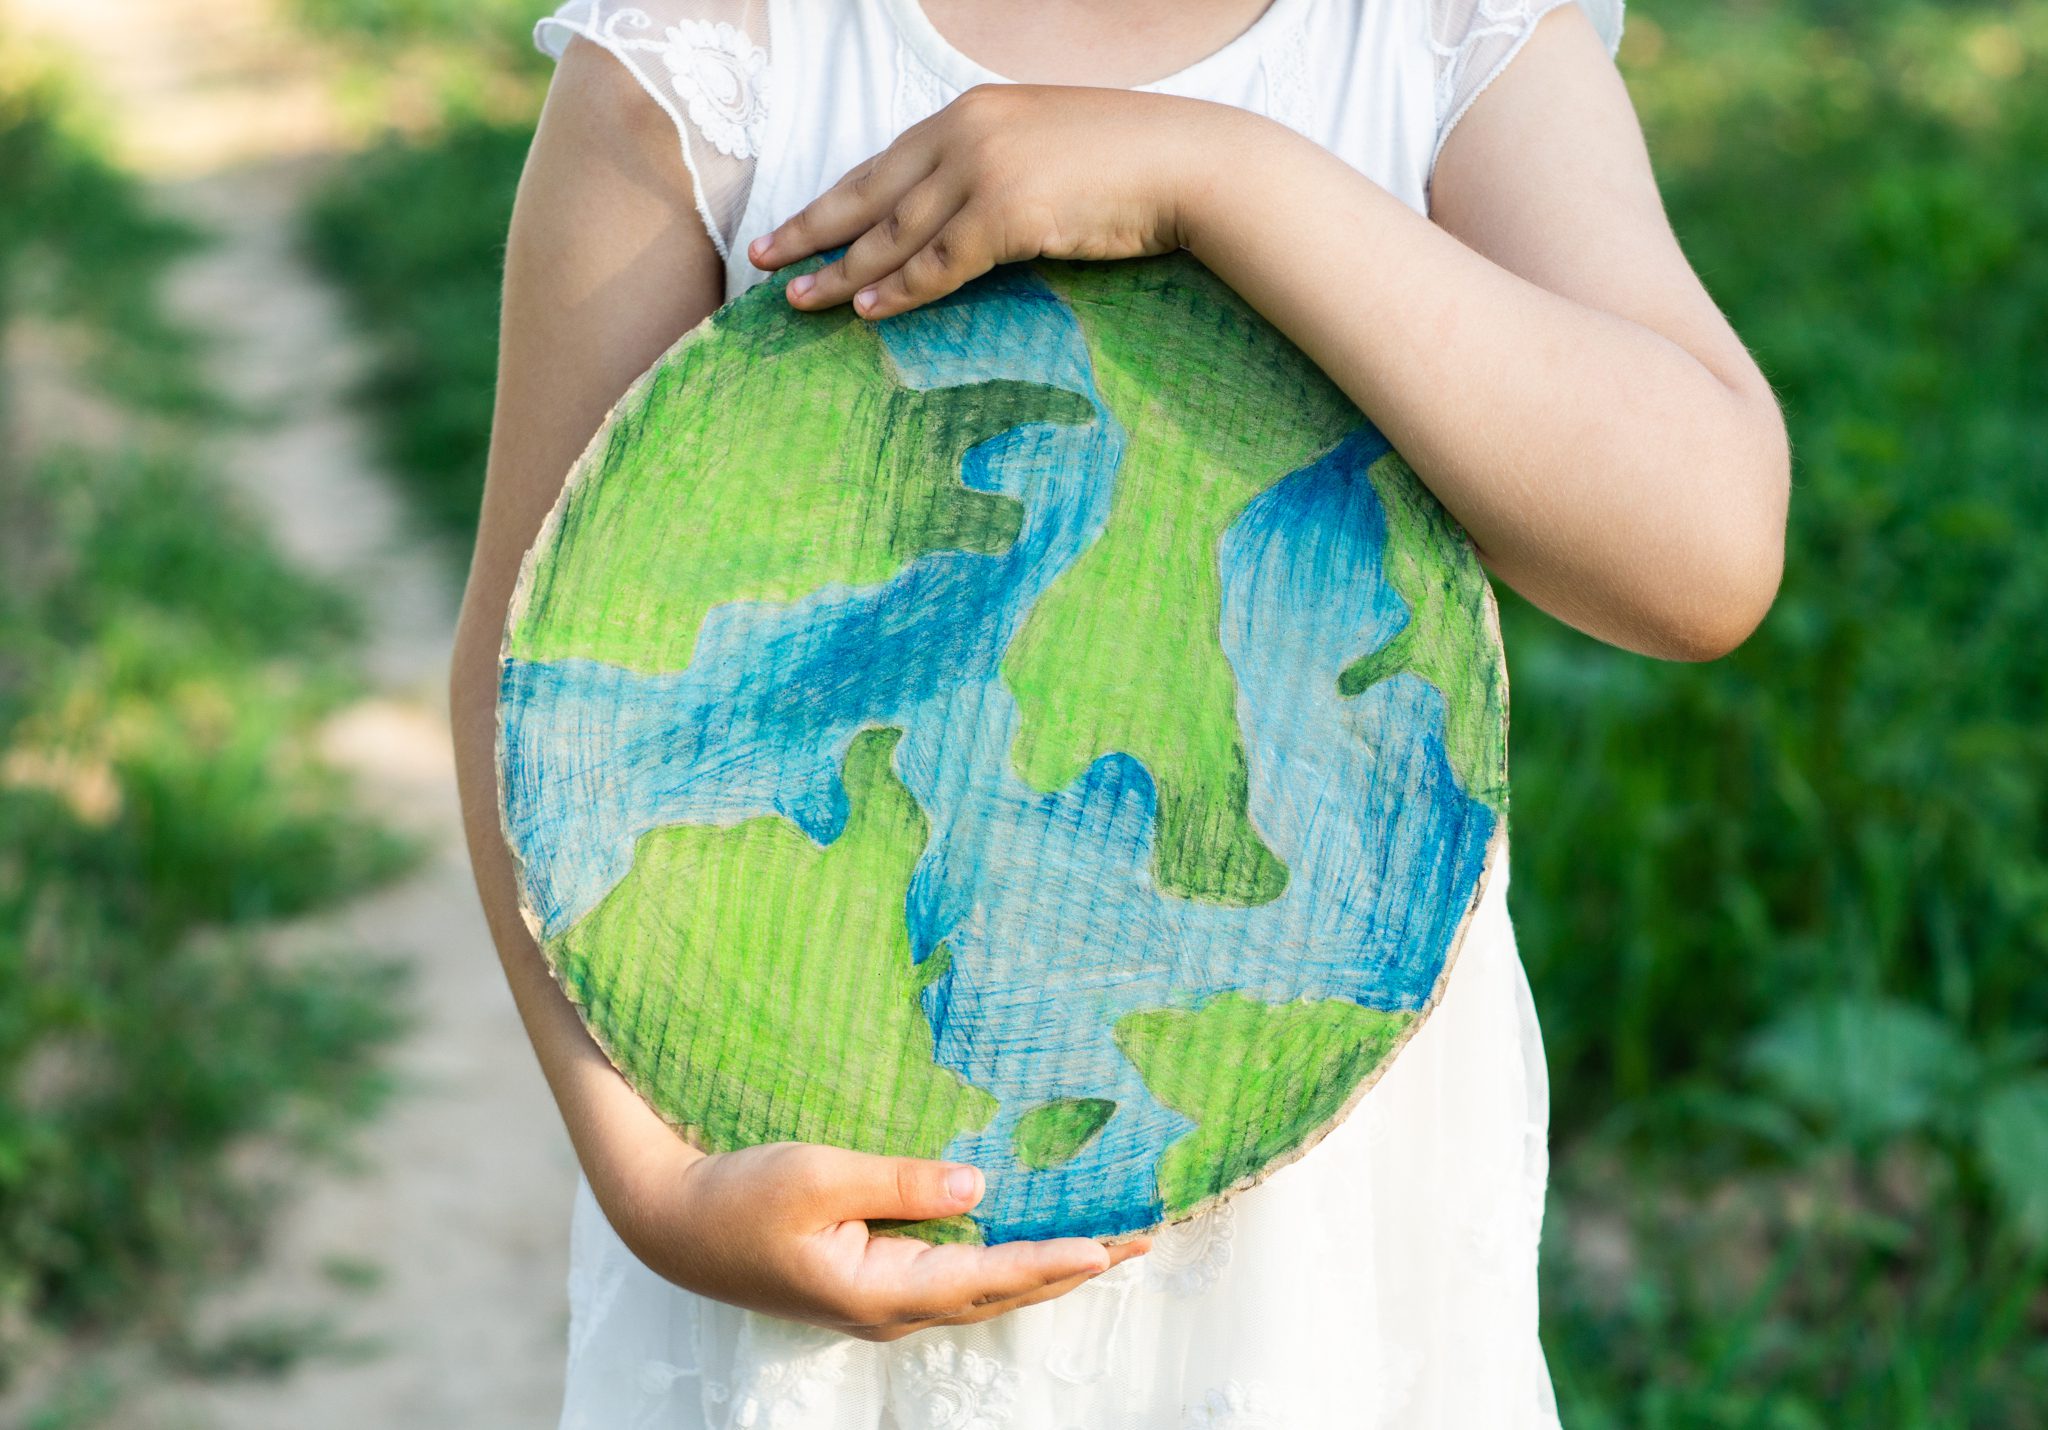 Earth Day resources for discussing environmental issues